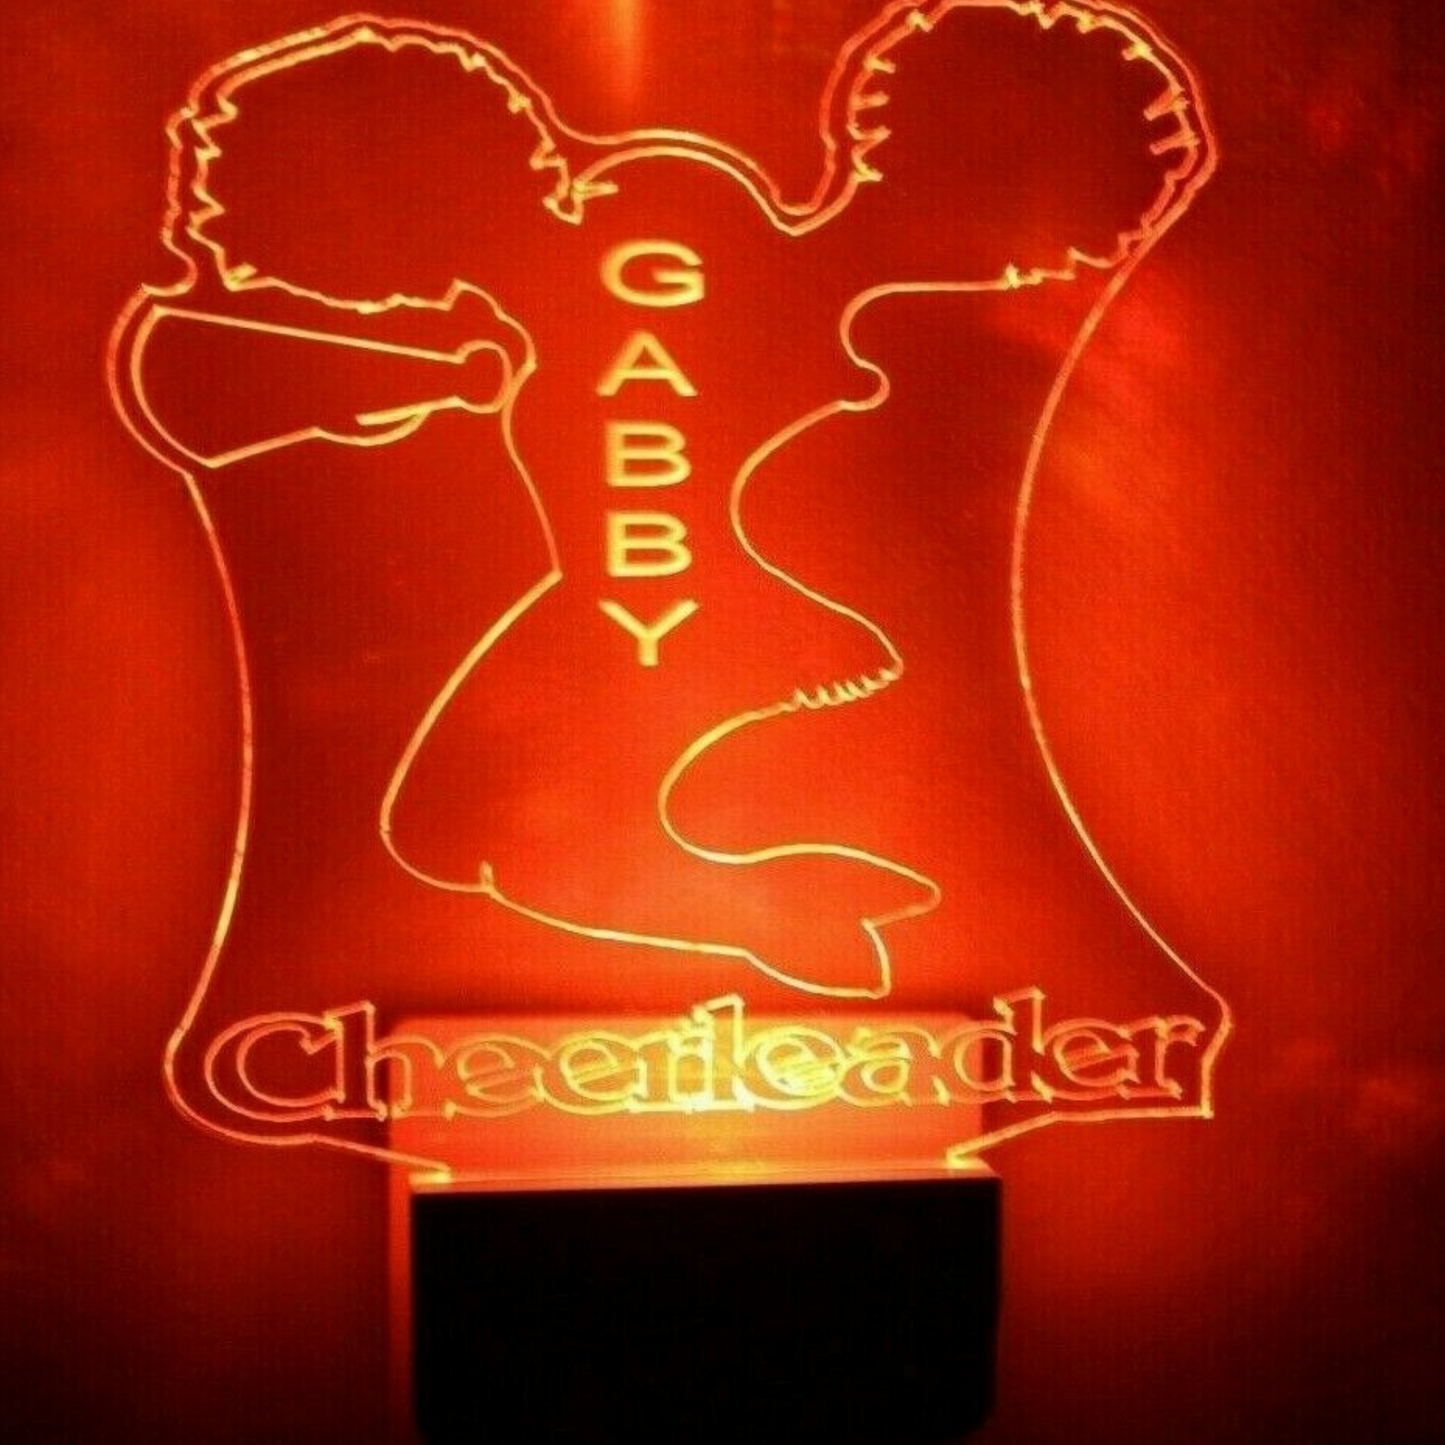 Cheerleader Night Light Multi Color Personalized LED Wall Plug-in Cool-Touch Smart Dusk to Dawn Sensor